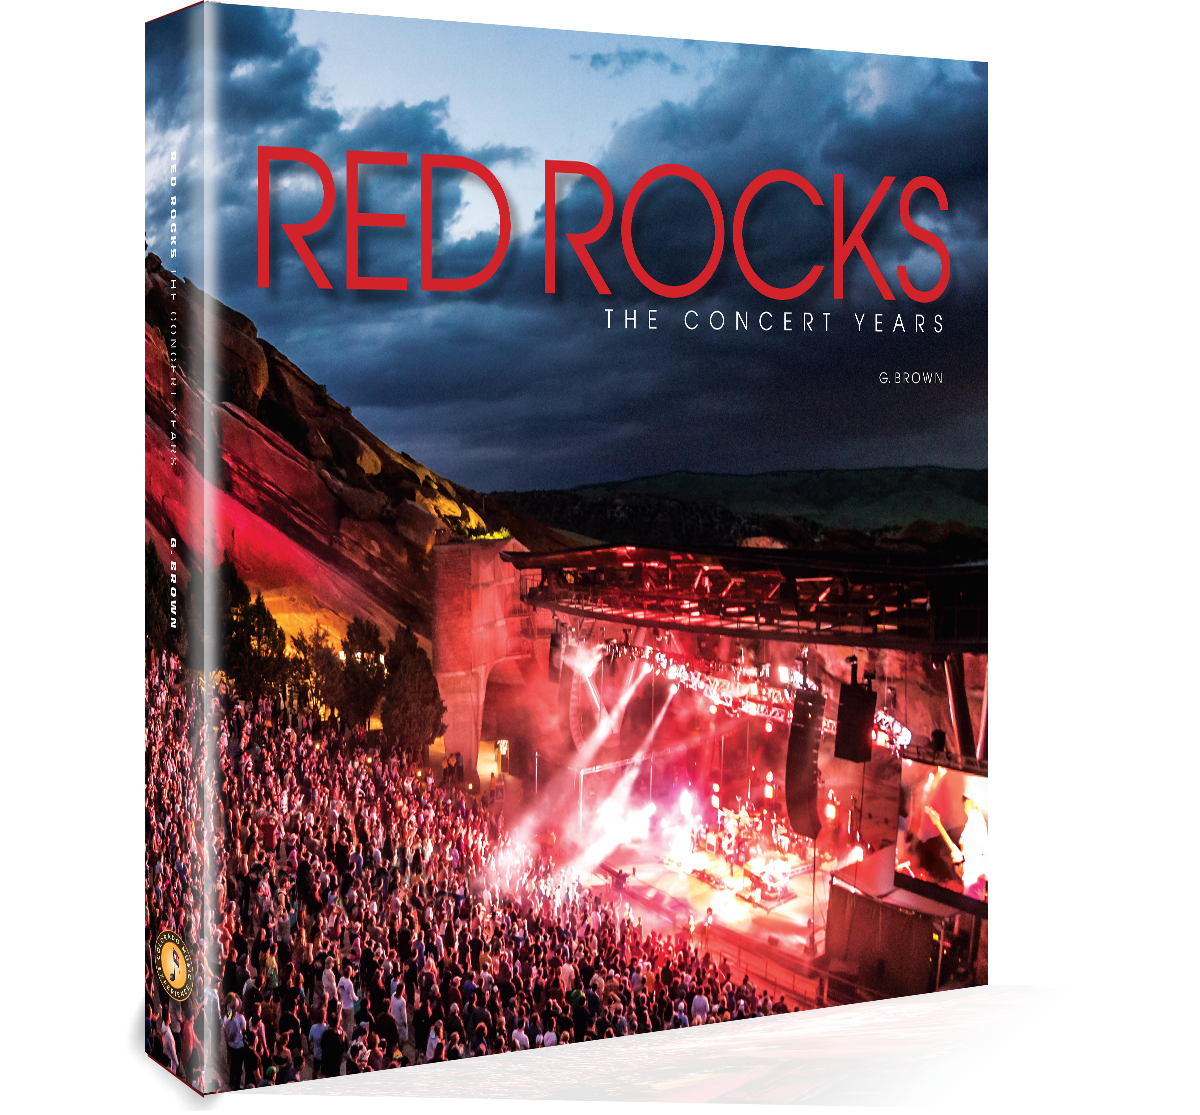 Red Rocks: The Concert Years